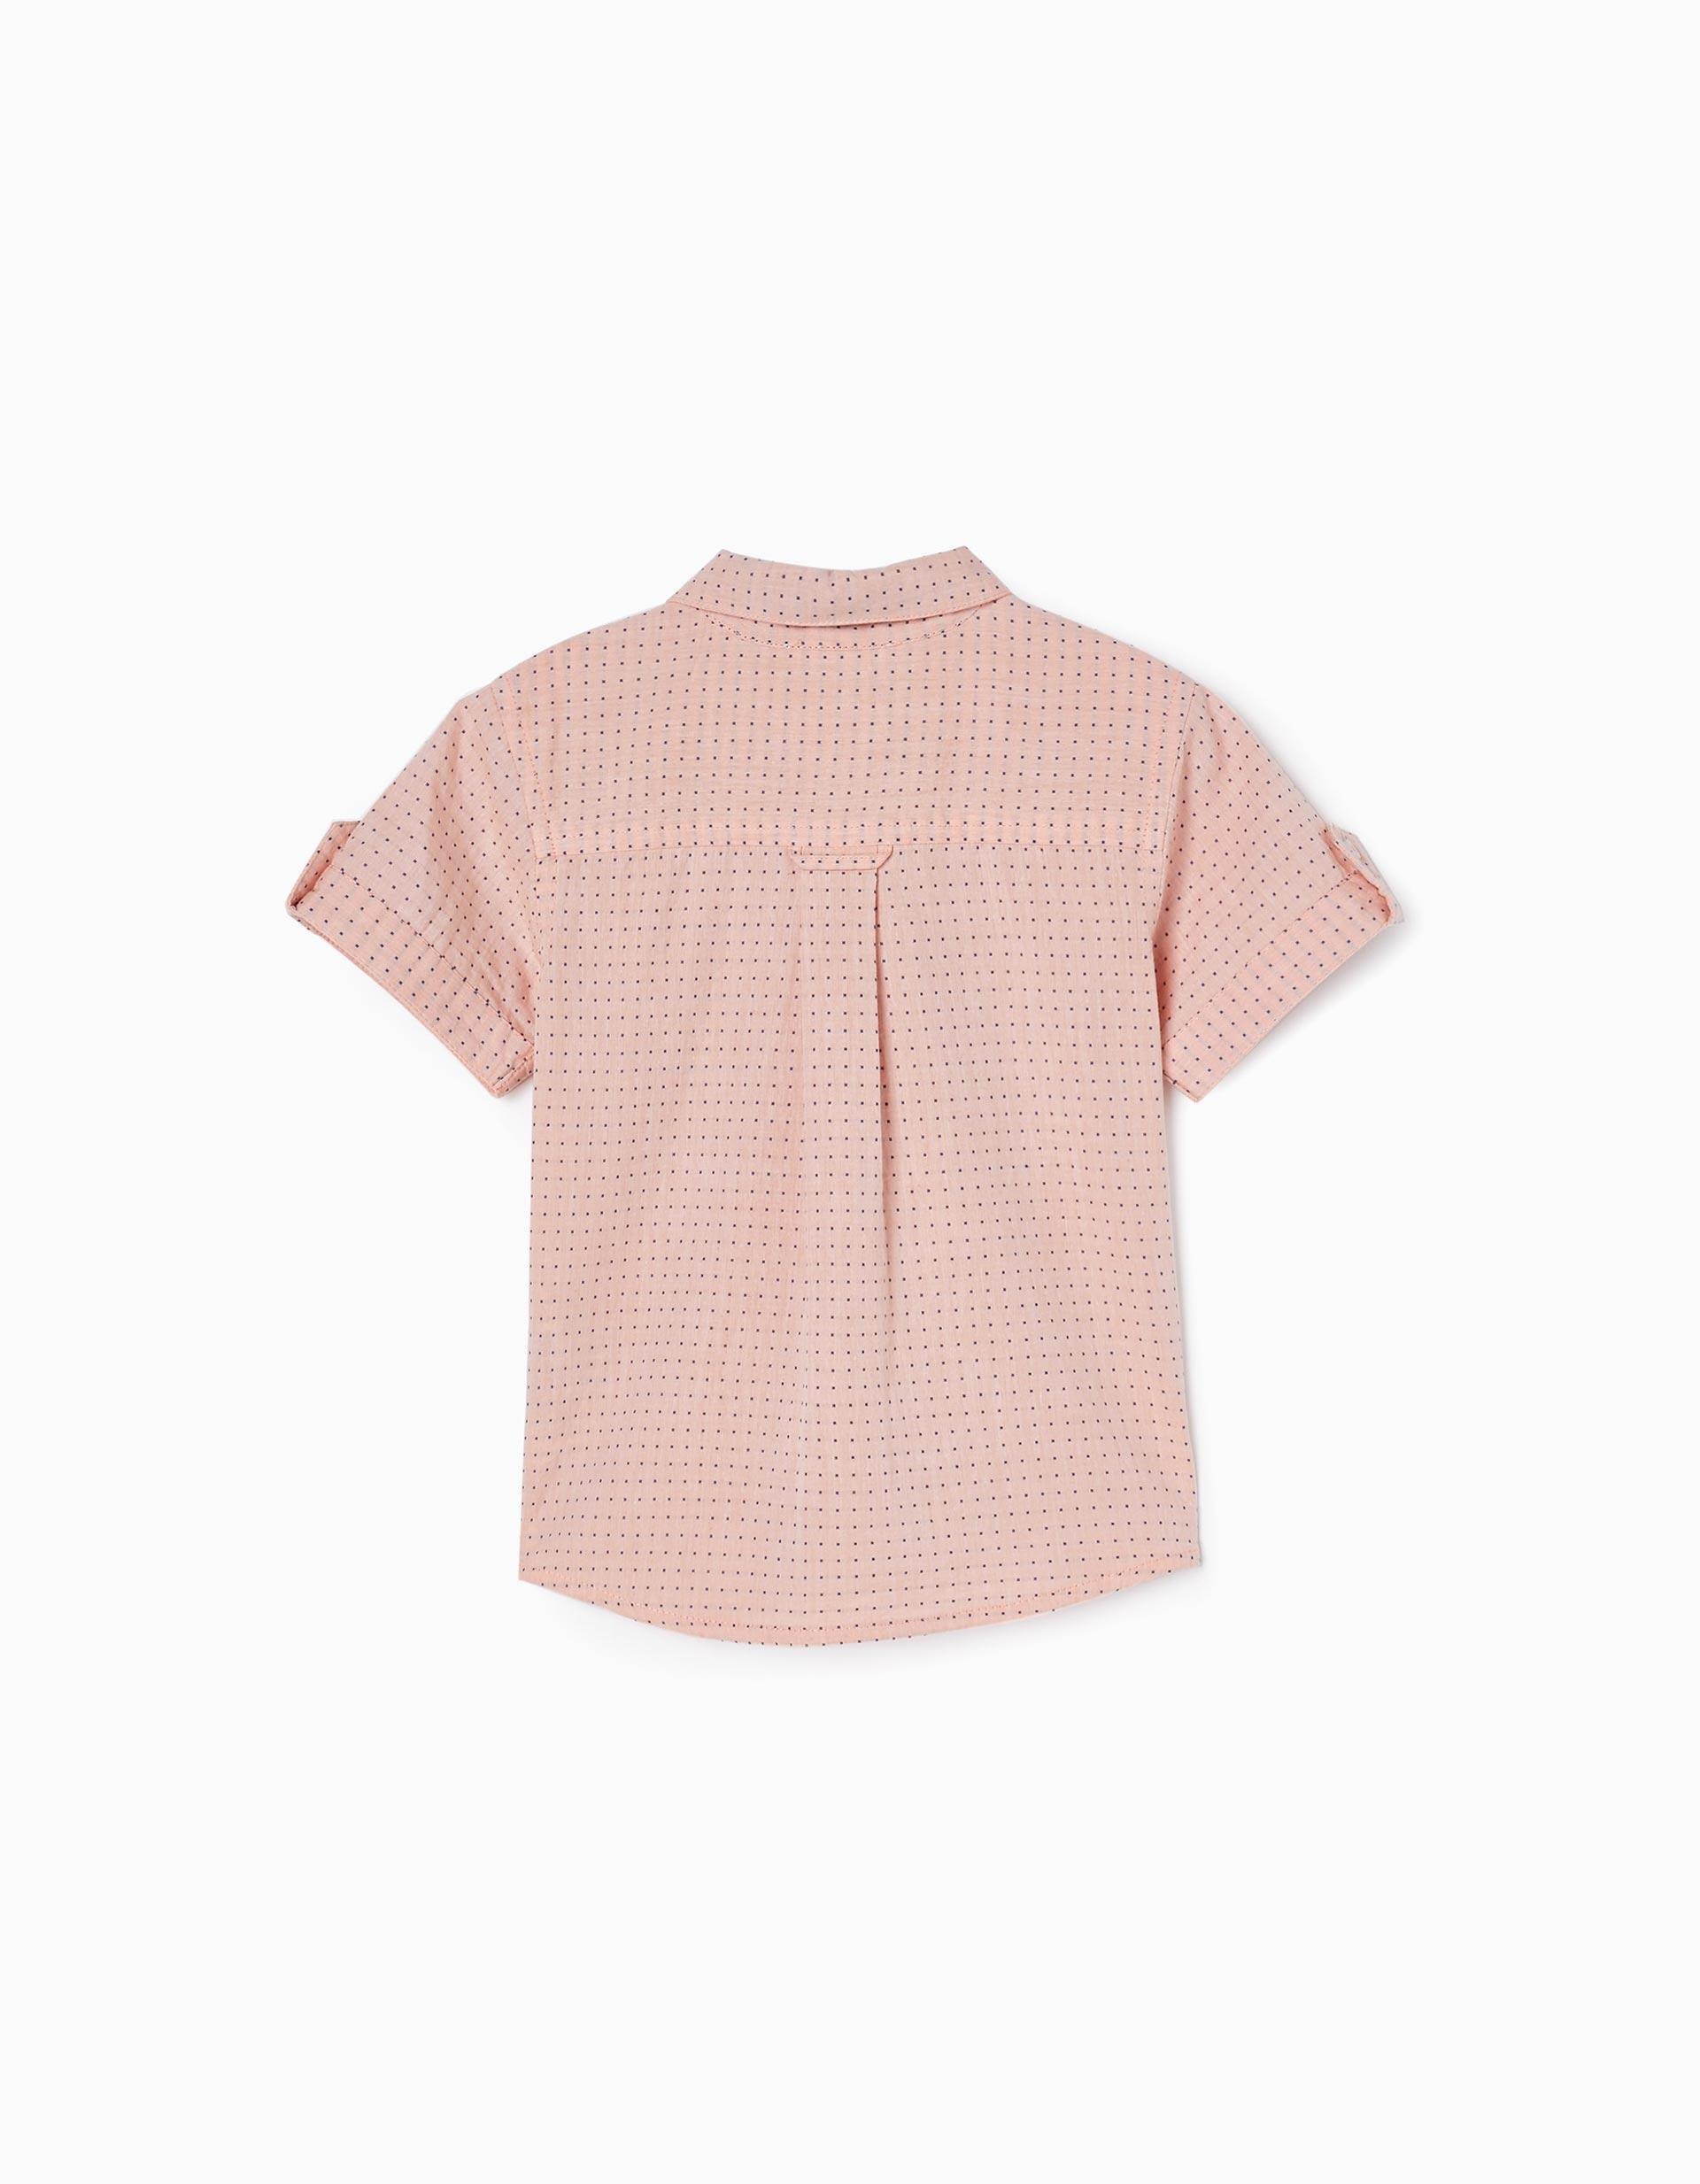 Zippy - Pink Shirt With Bow Tie, Baby Boys